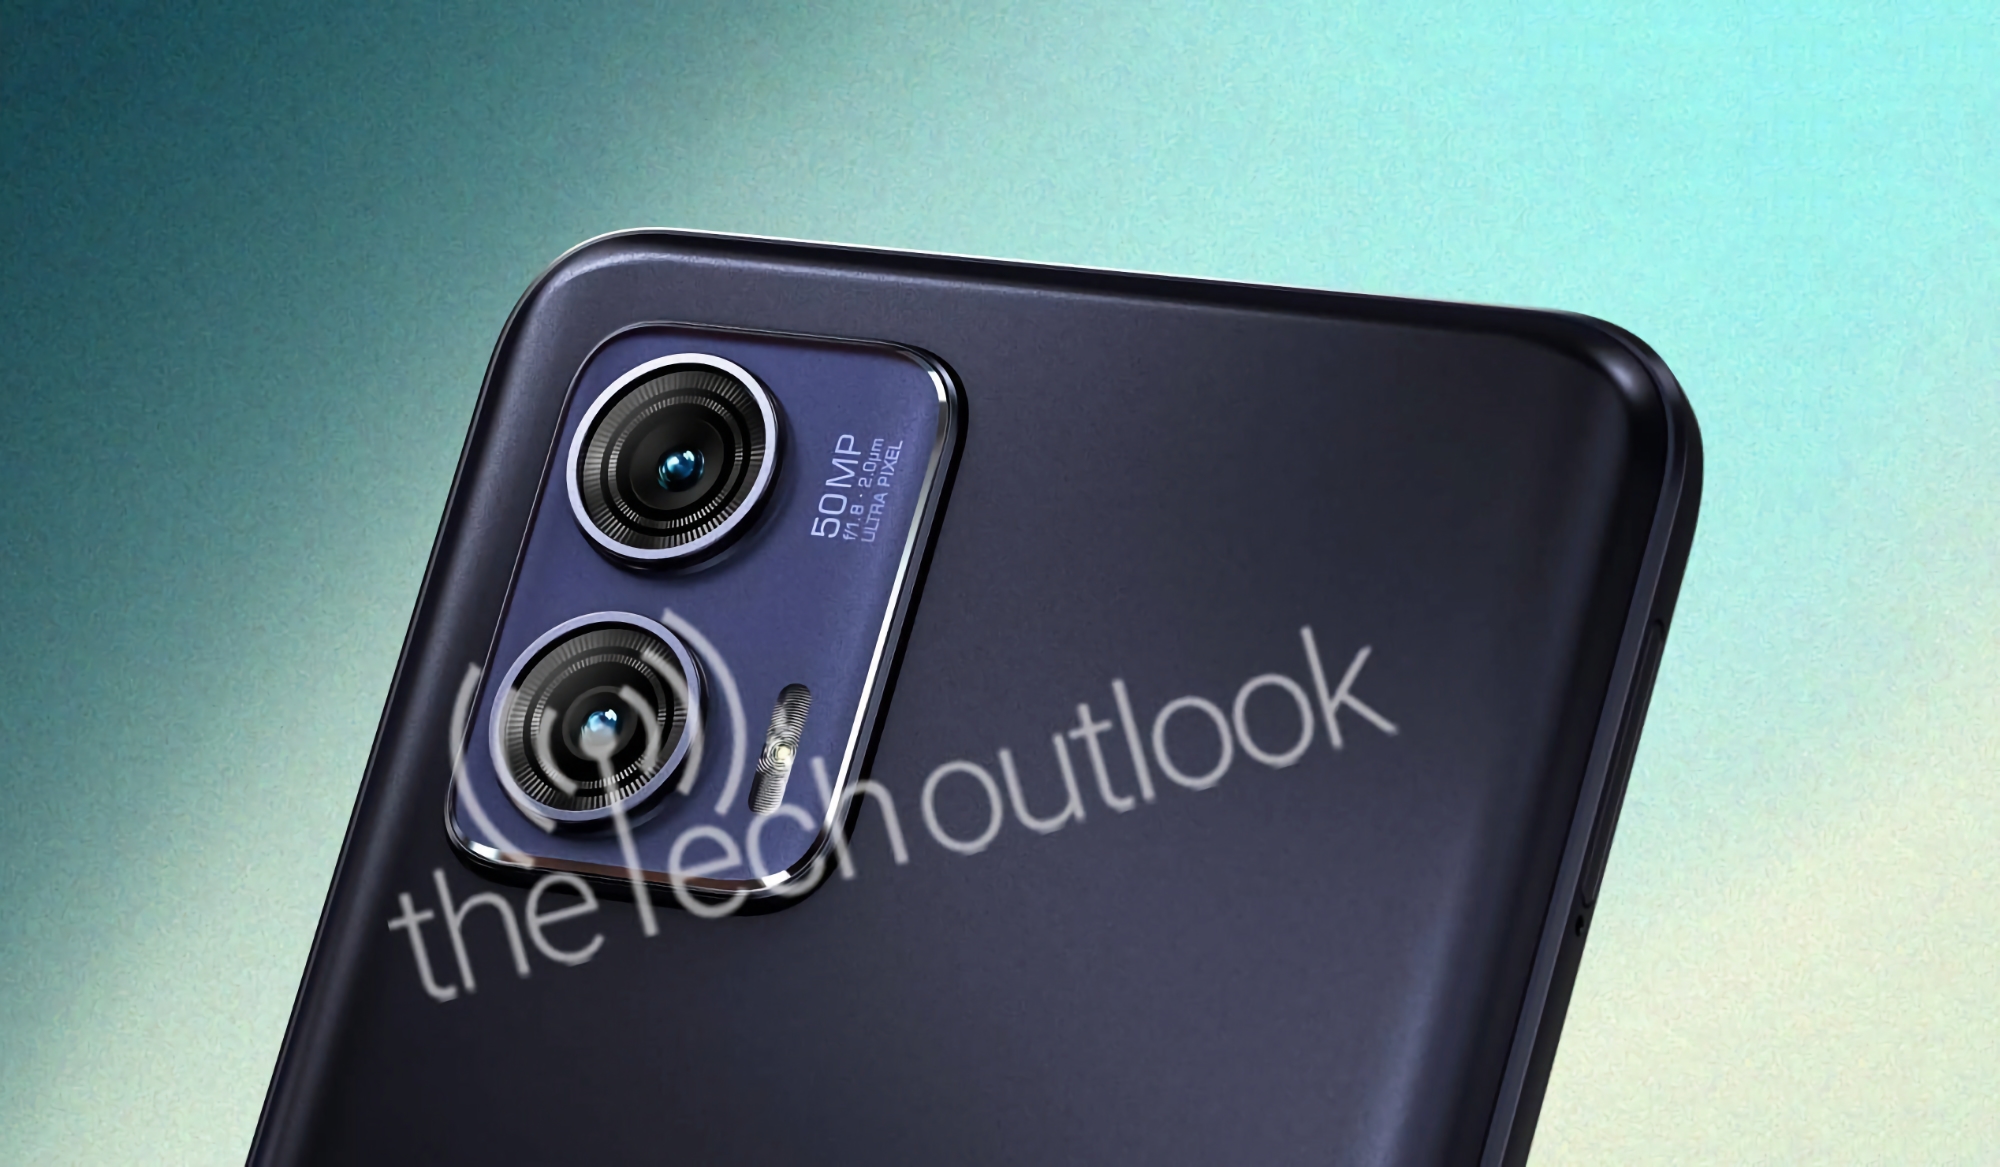 Not only Moto G53: Motorola is preparing to announce Moto G73 with 120 Hz screen, MediaTek Dimensity 930 chip and 5000 mAh battery